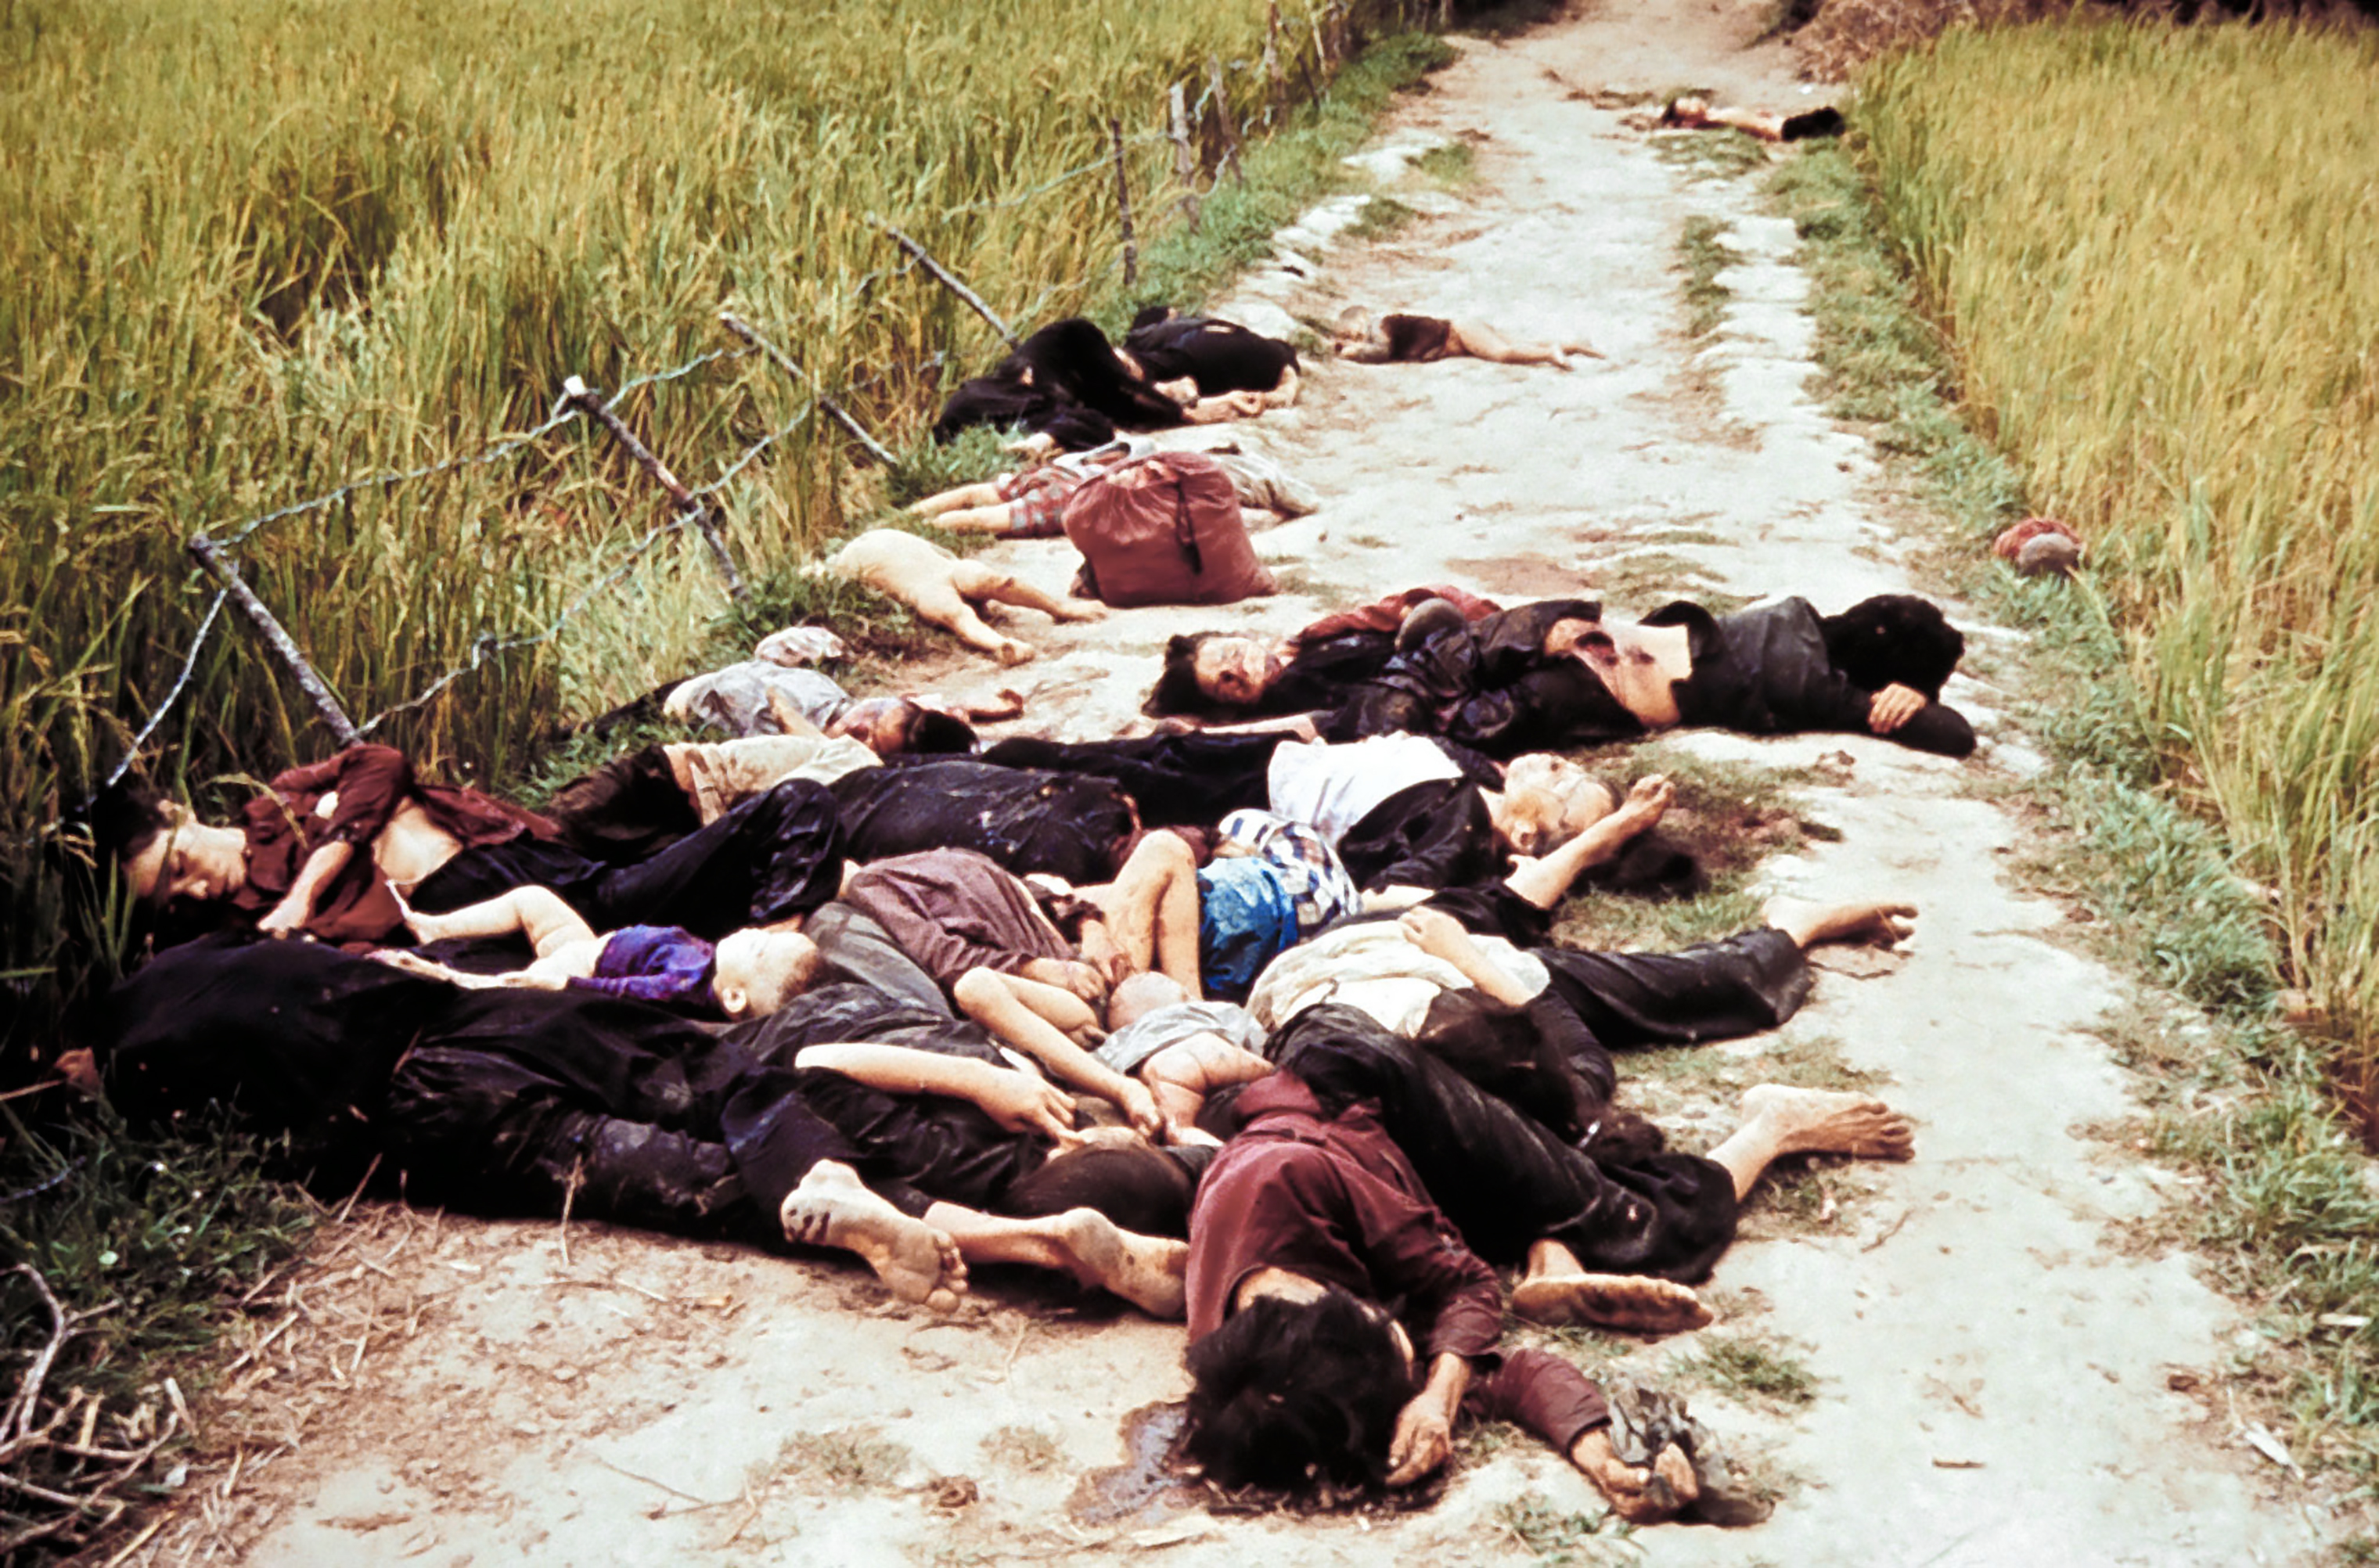 When this photo ran in LIFE, the caption noted that Haeberle "found the bodies above on a road leading from the village." This image later appeared on the front page of the <em>Plain Dealer</em>. (Ronald L. Haeberle—The LIFE Images Collection)